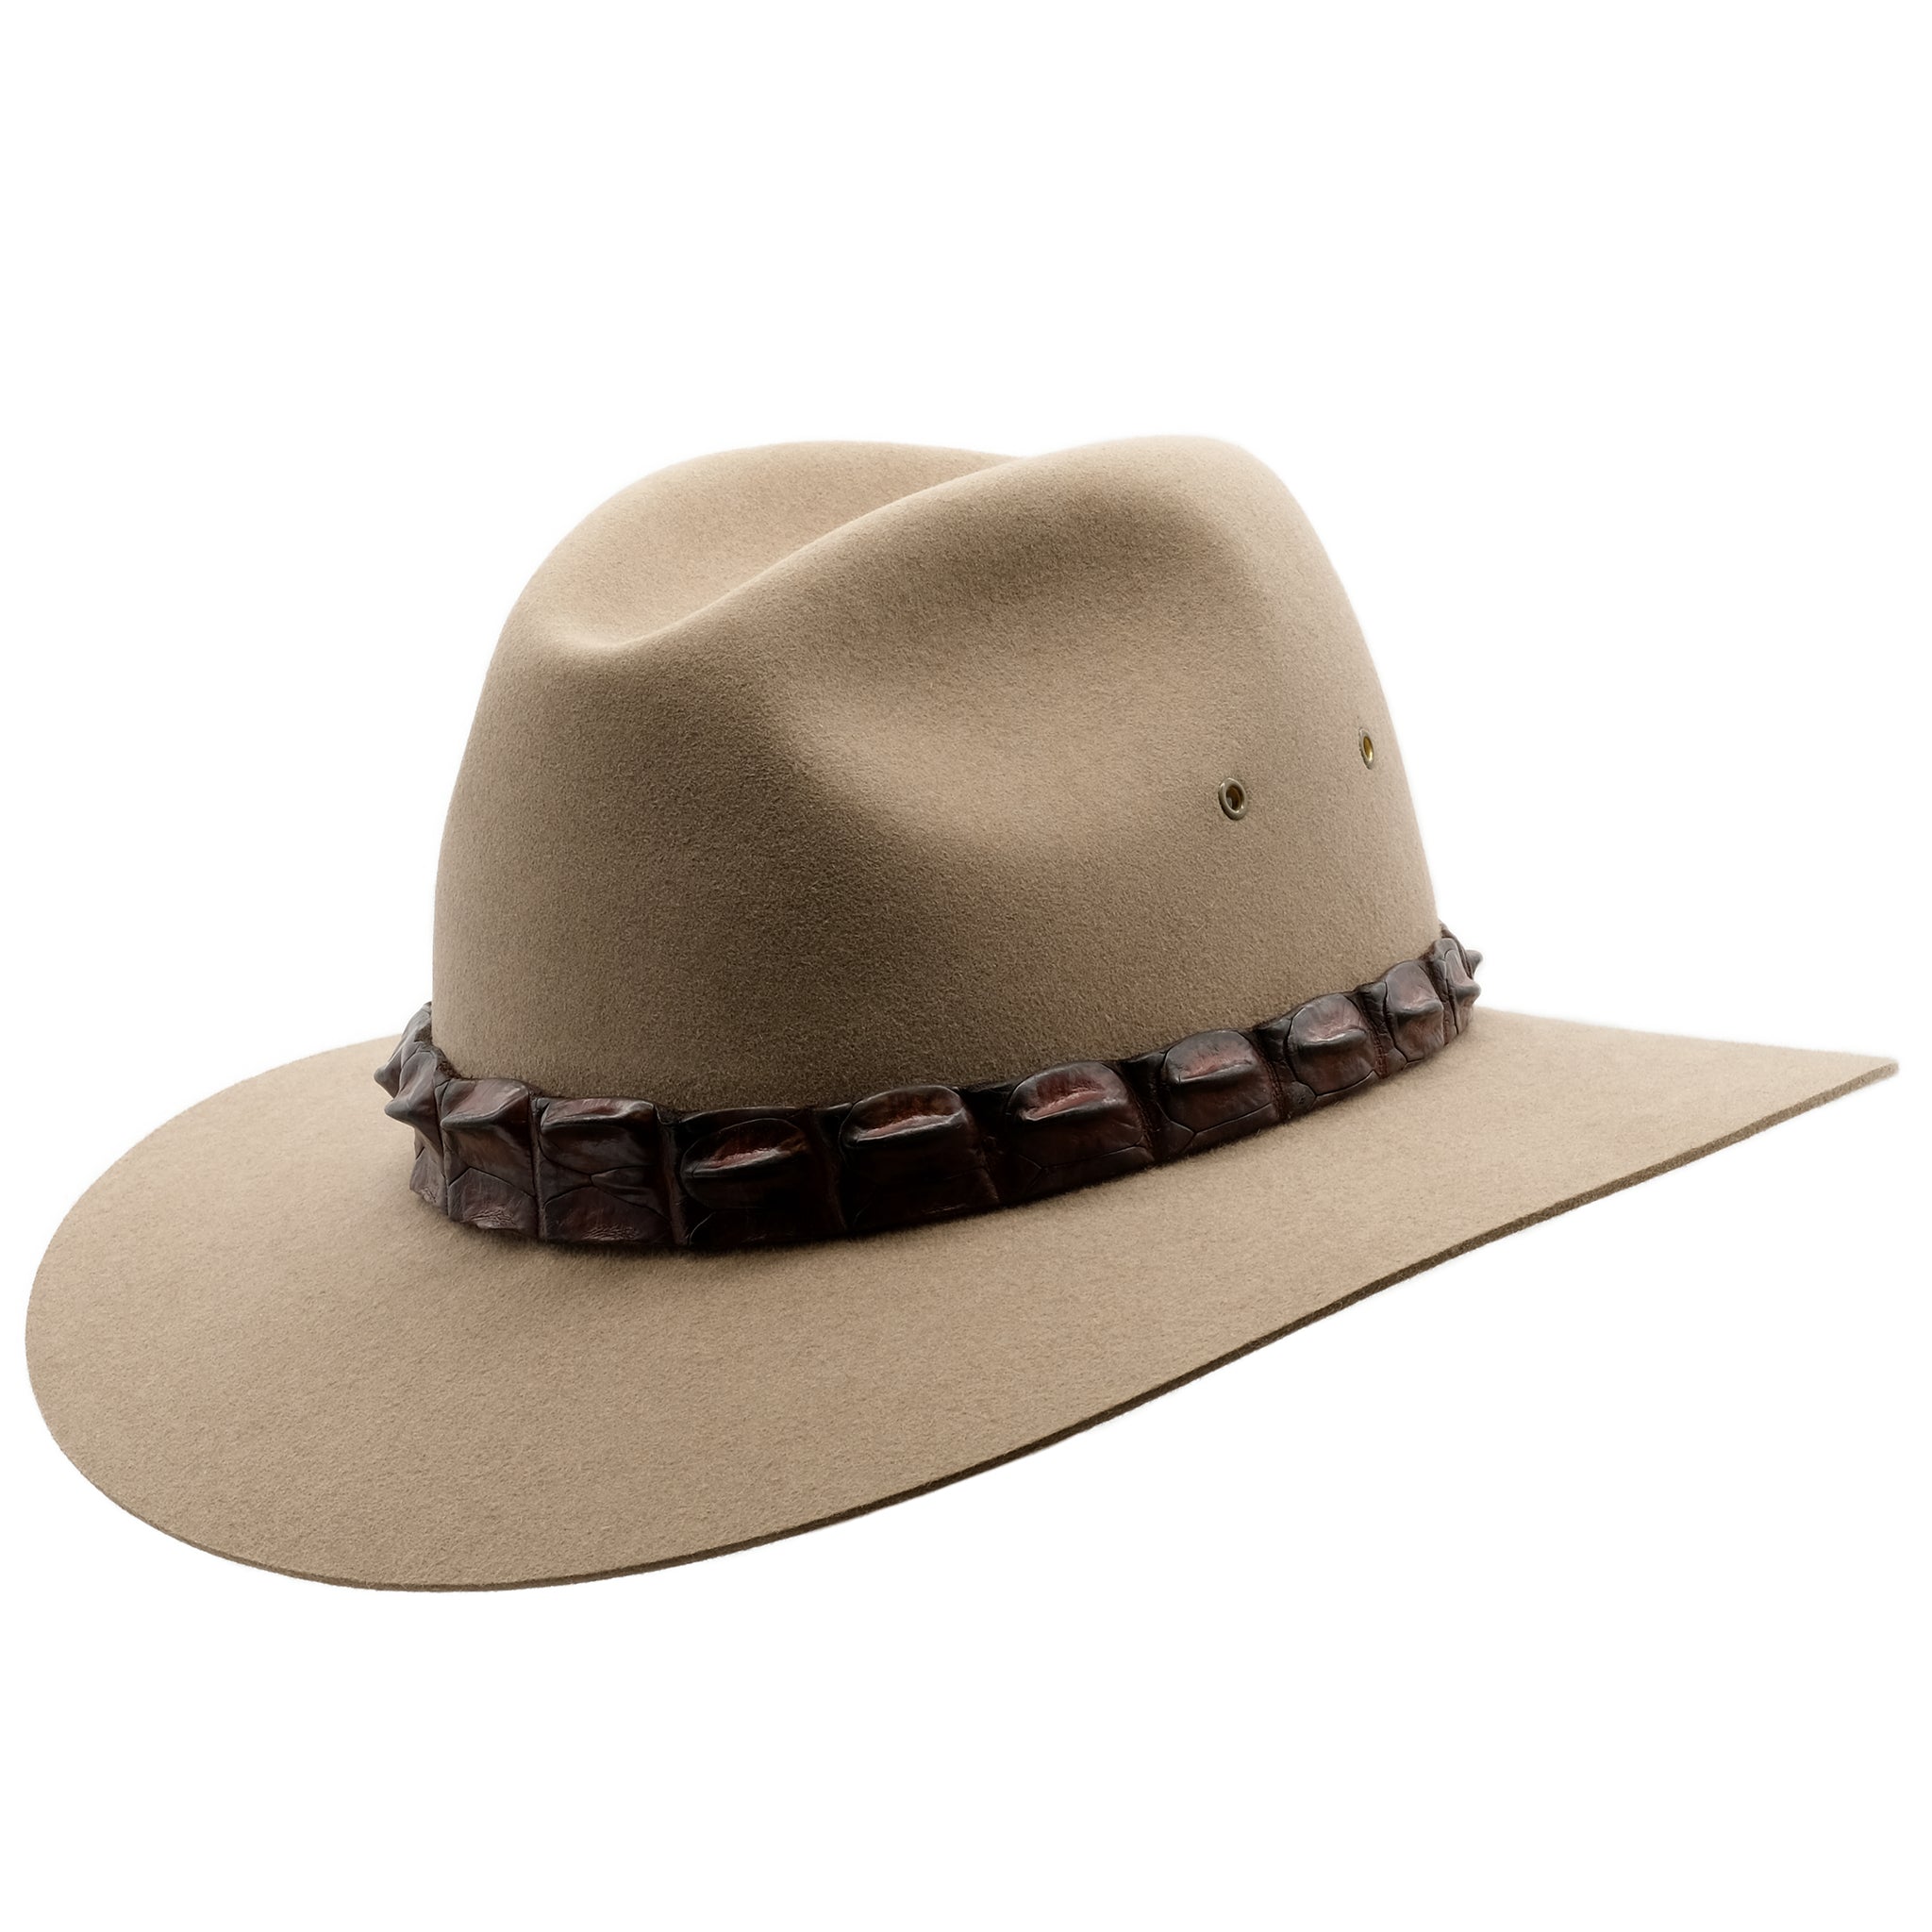 Angle view of the Bran coloured Akubra Coolabah hat